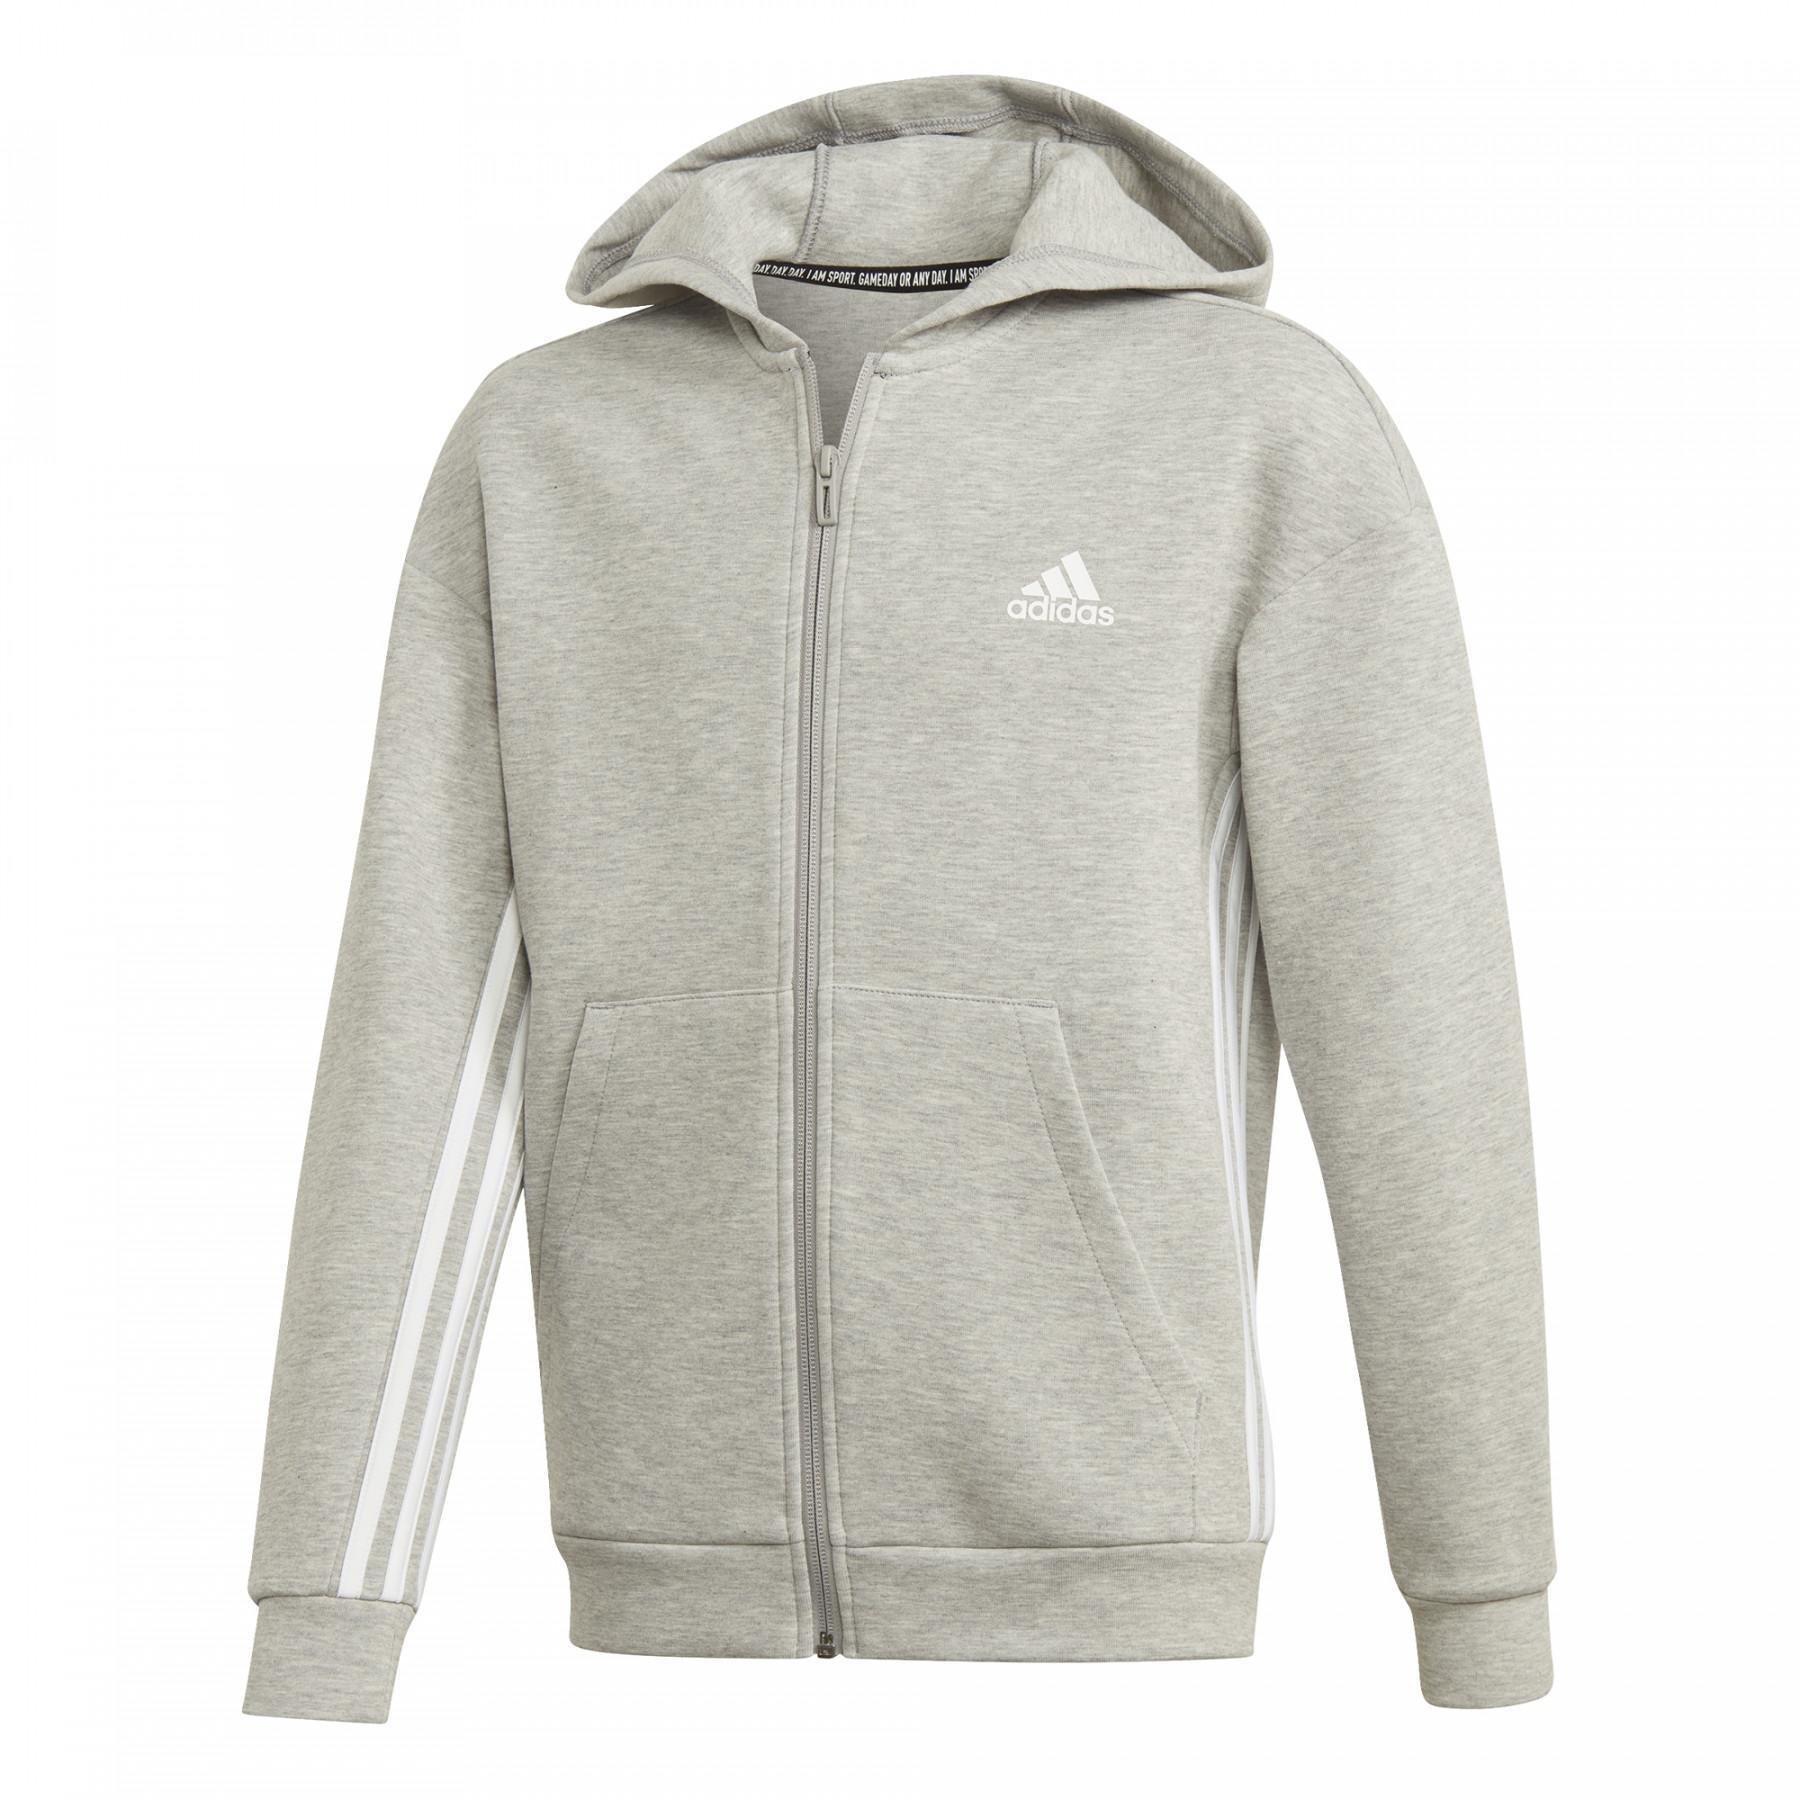 Children's training jacket adidas Must Haves 3-Stripes Track